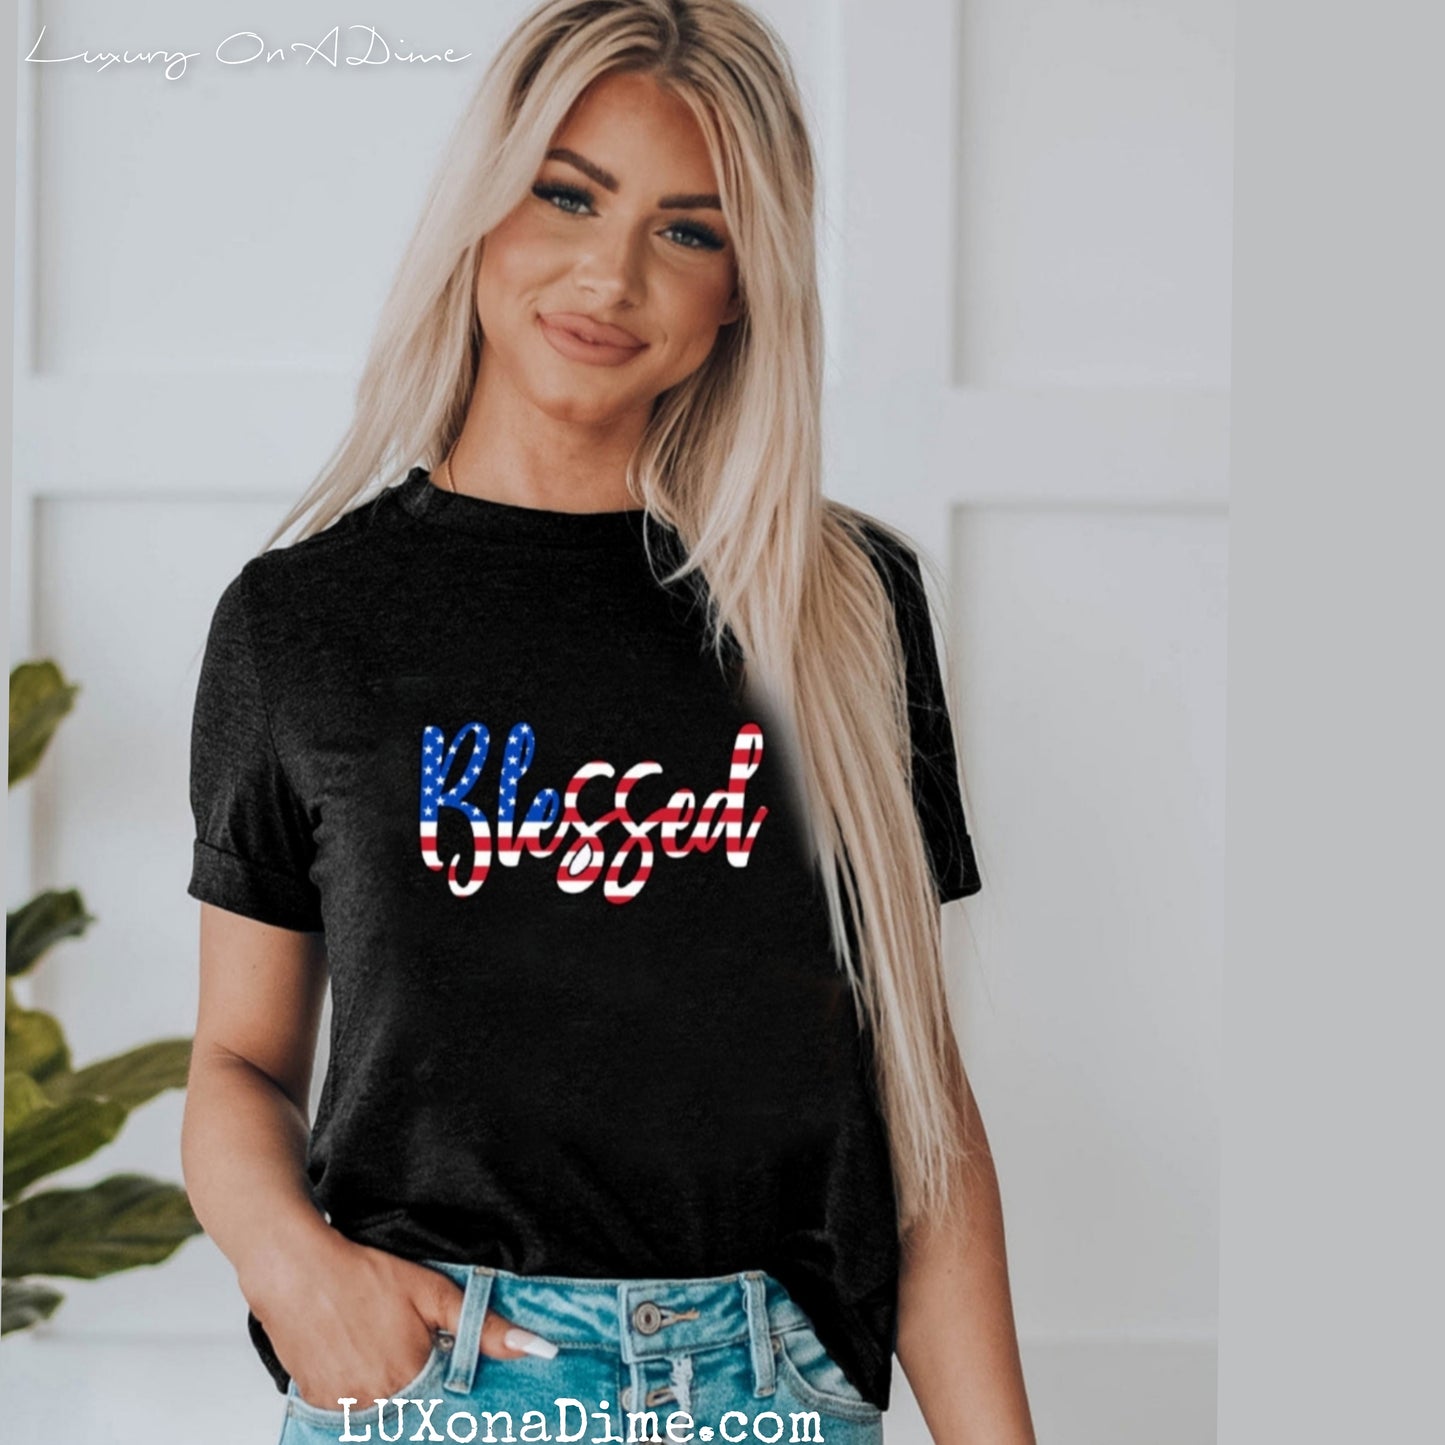 Blessed American Flag Graphic Top Classic Patriotic Cuffed Short Sleeve Shirt